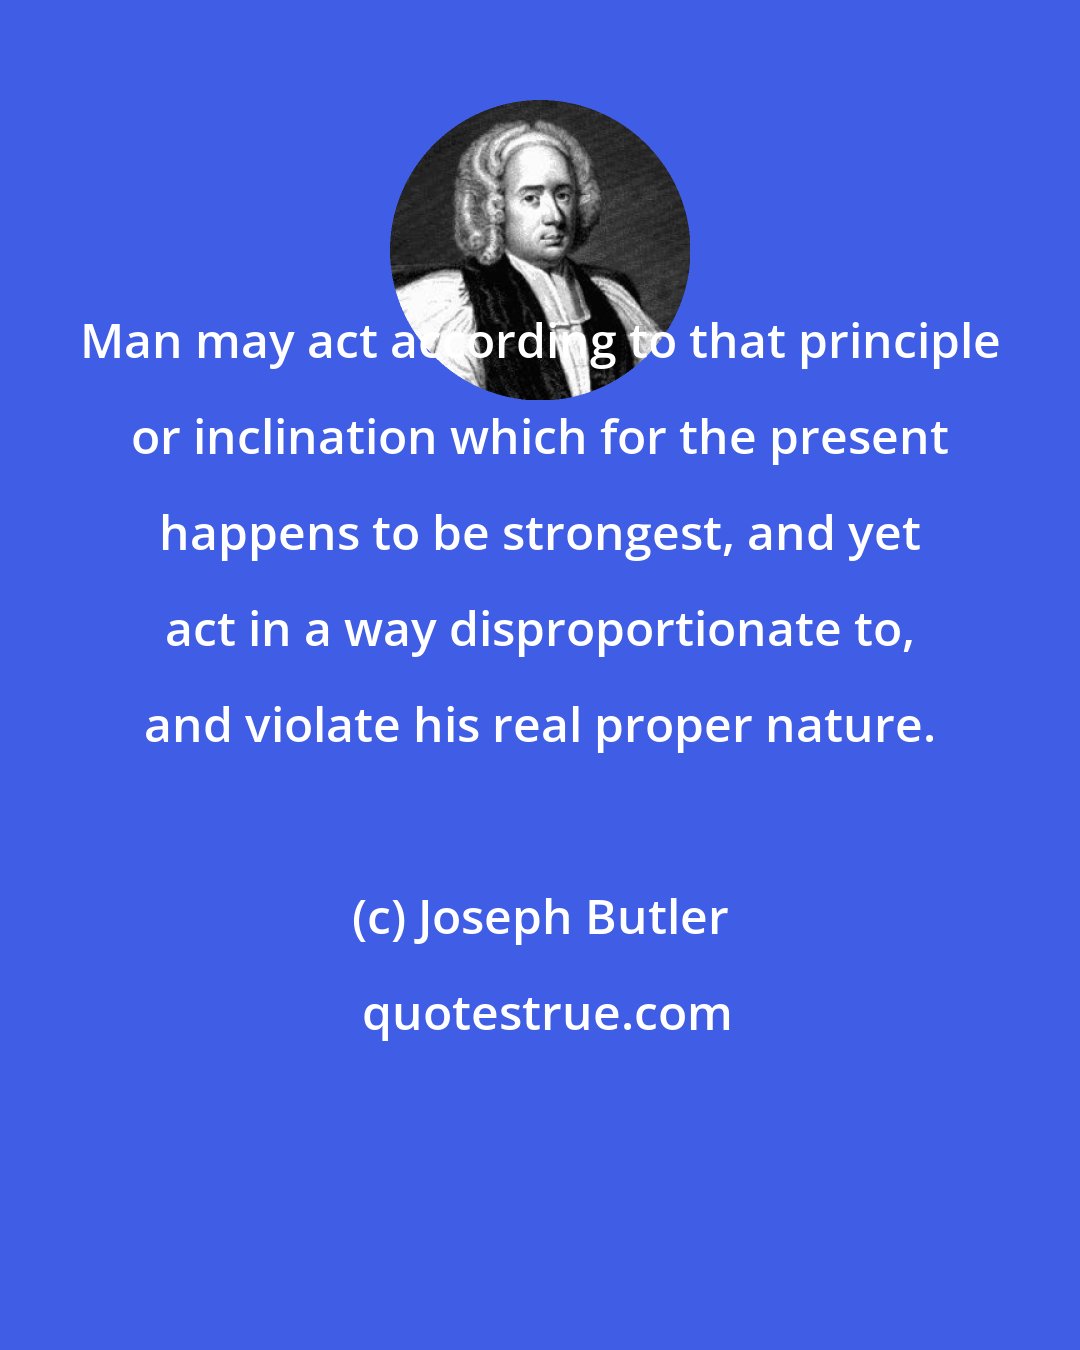 Joseph Butler: Man may act according to that principle or inclination which for the present happens to be strongest, and yet act in a way disproportionate to, and violate his real proper nature.